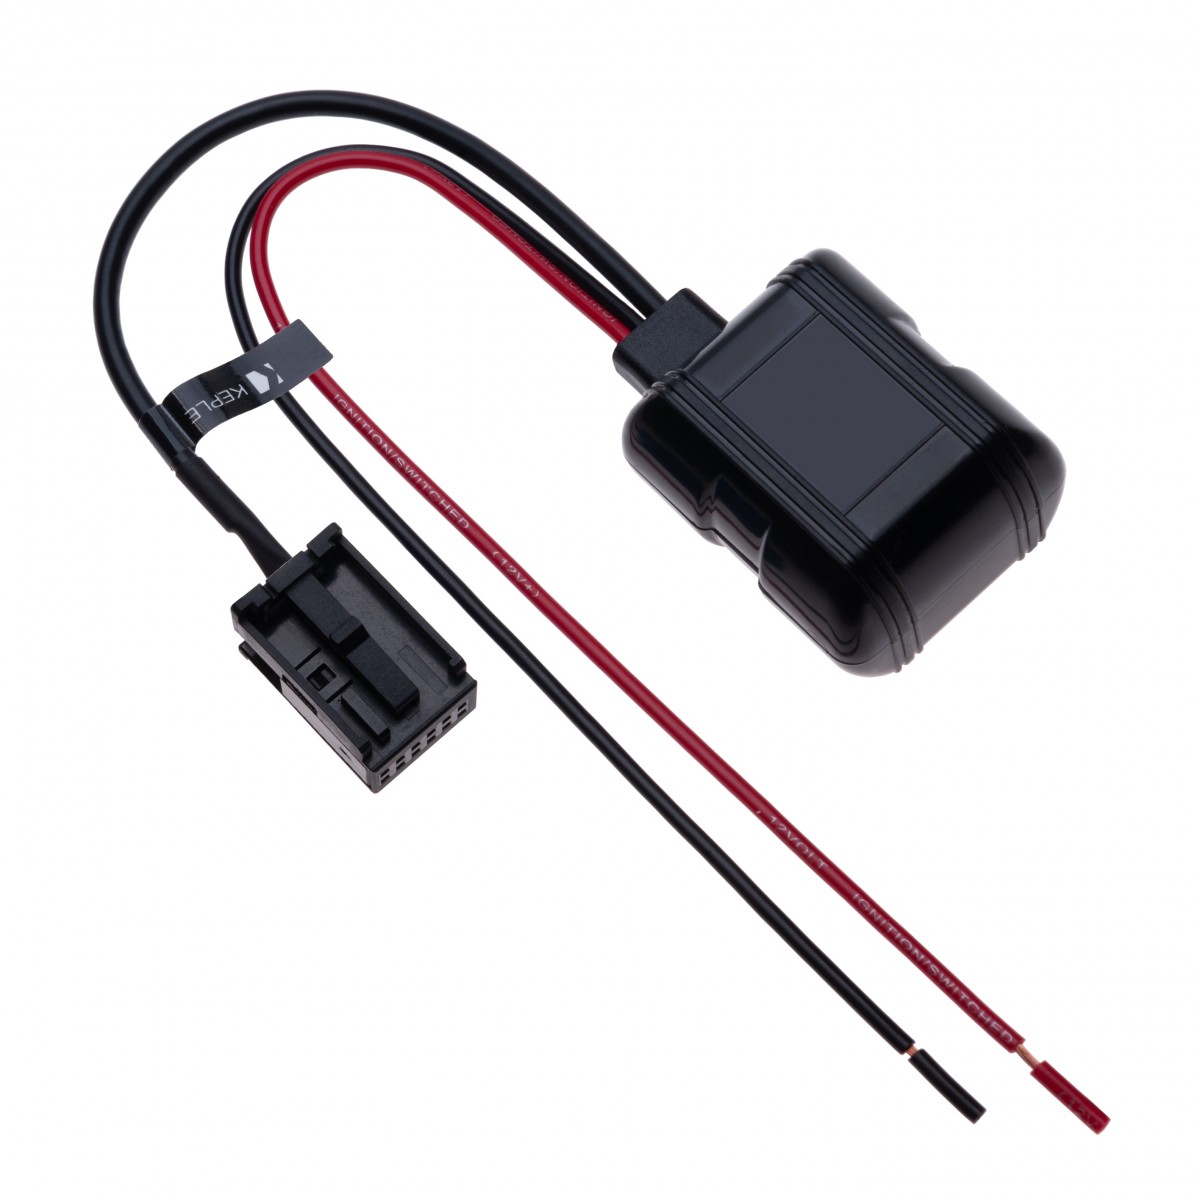 What Type Of Audio Cable Is Needed For A 2010 Ford Focus For Cellphone Phone To Car Stereo